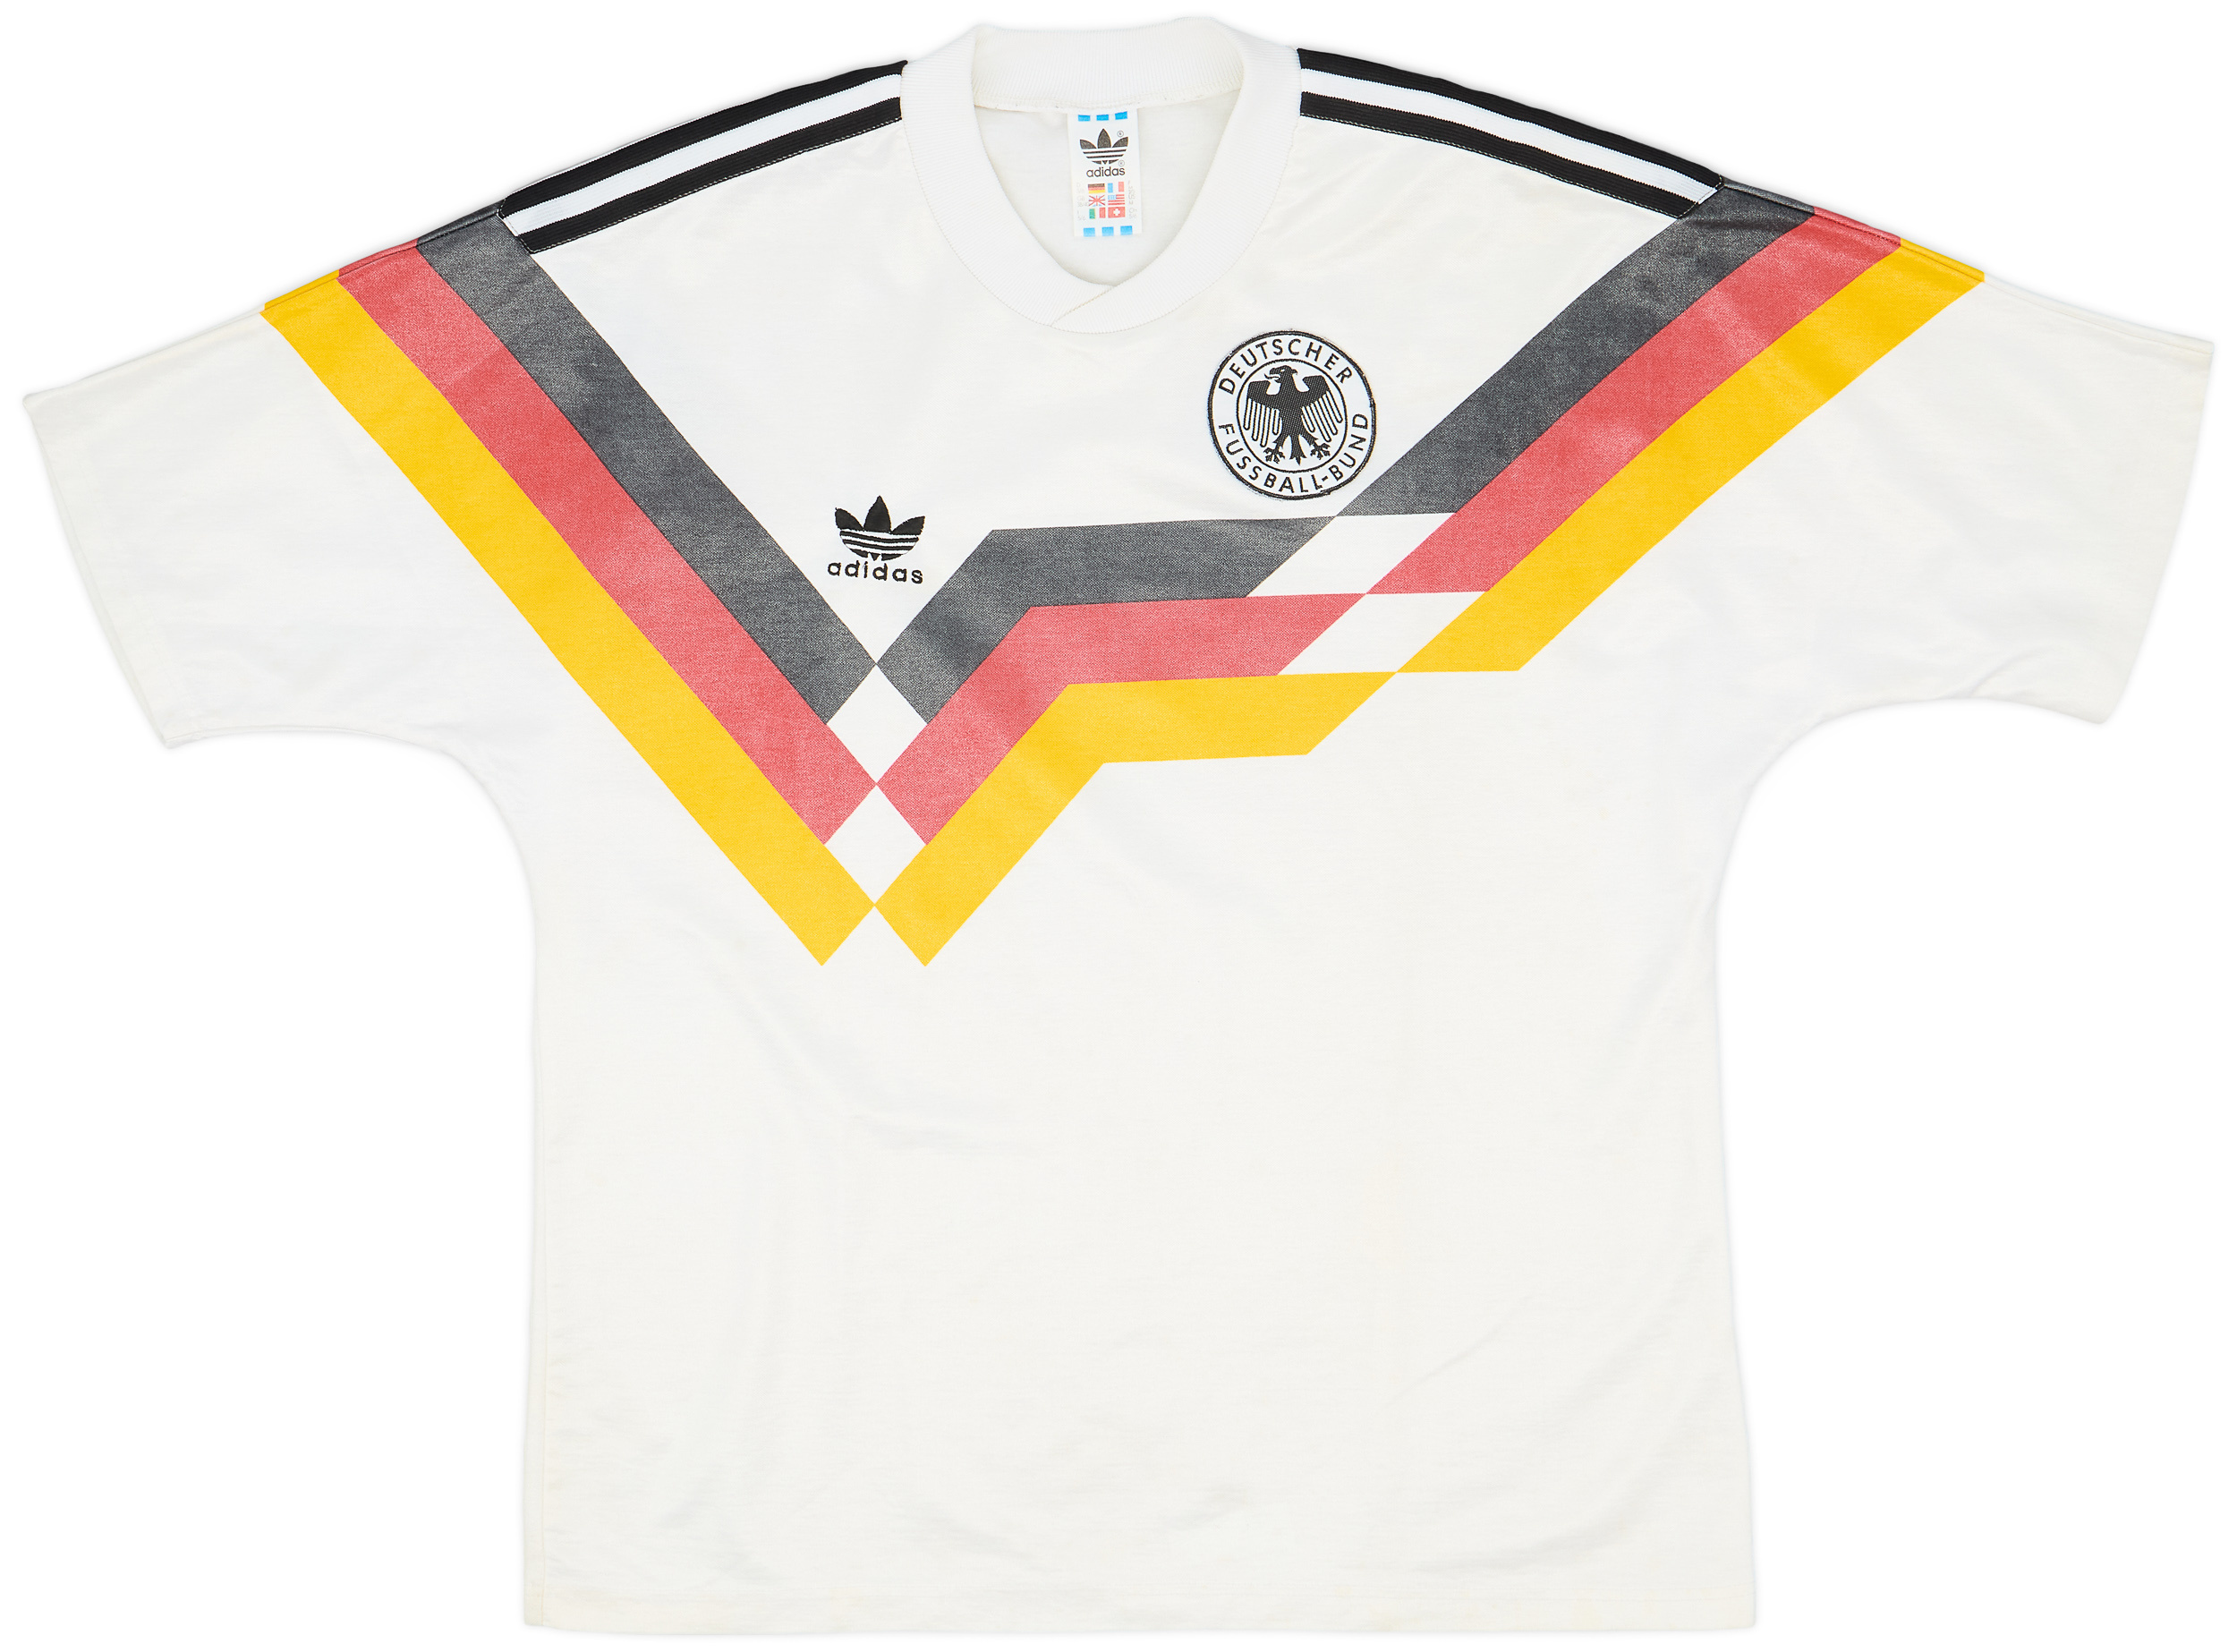 1988-90 West Germany Home Shirt - 8/10 - ()